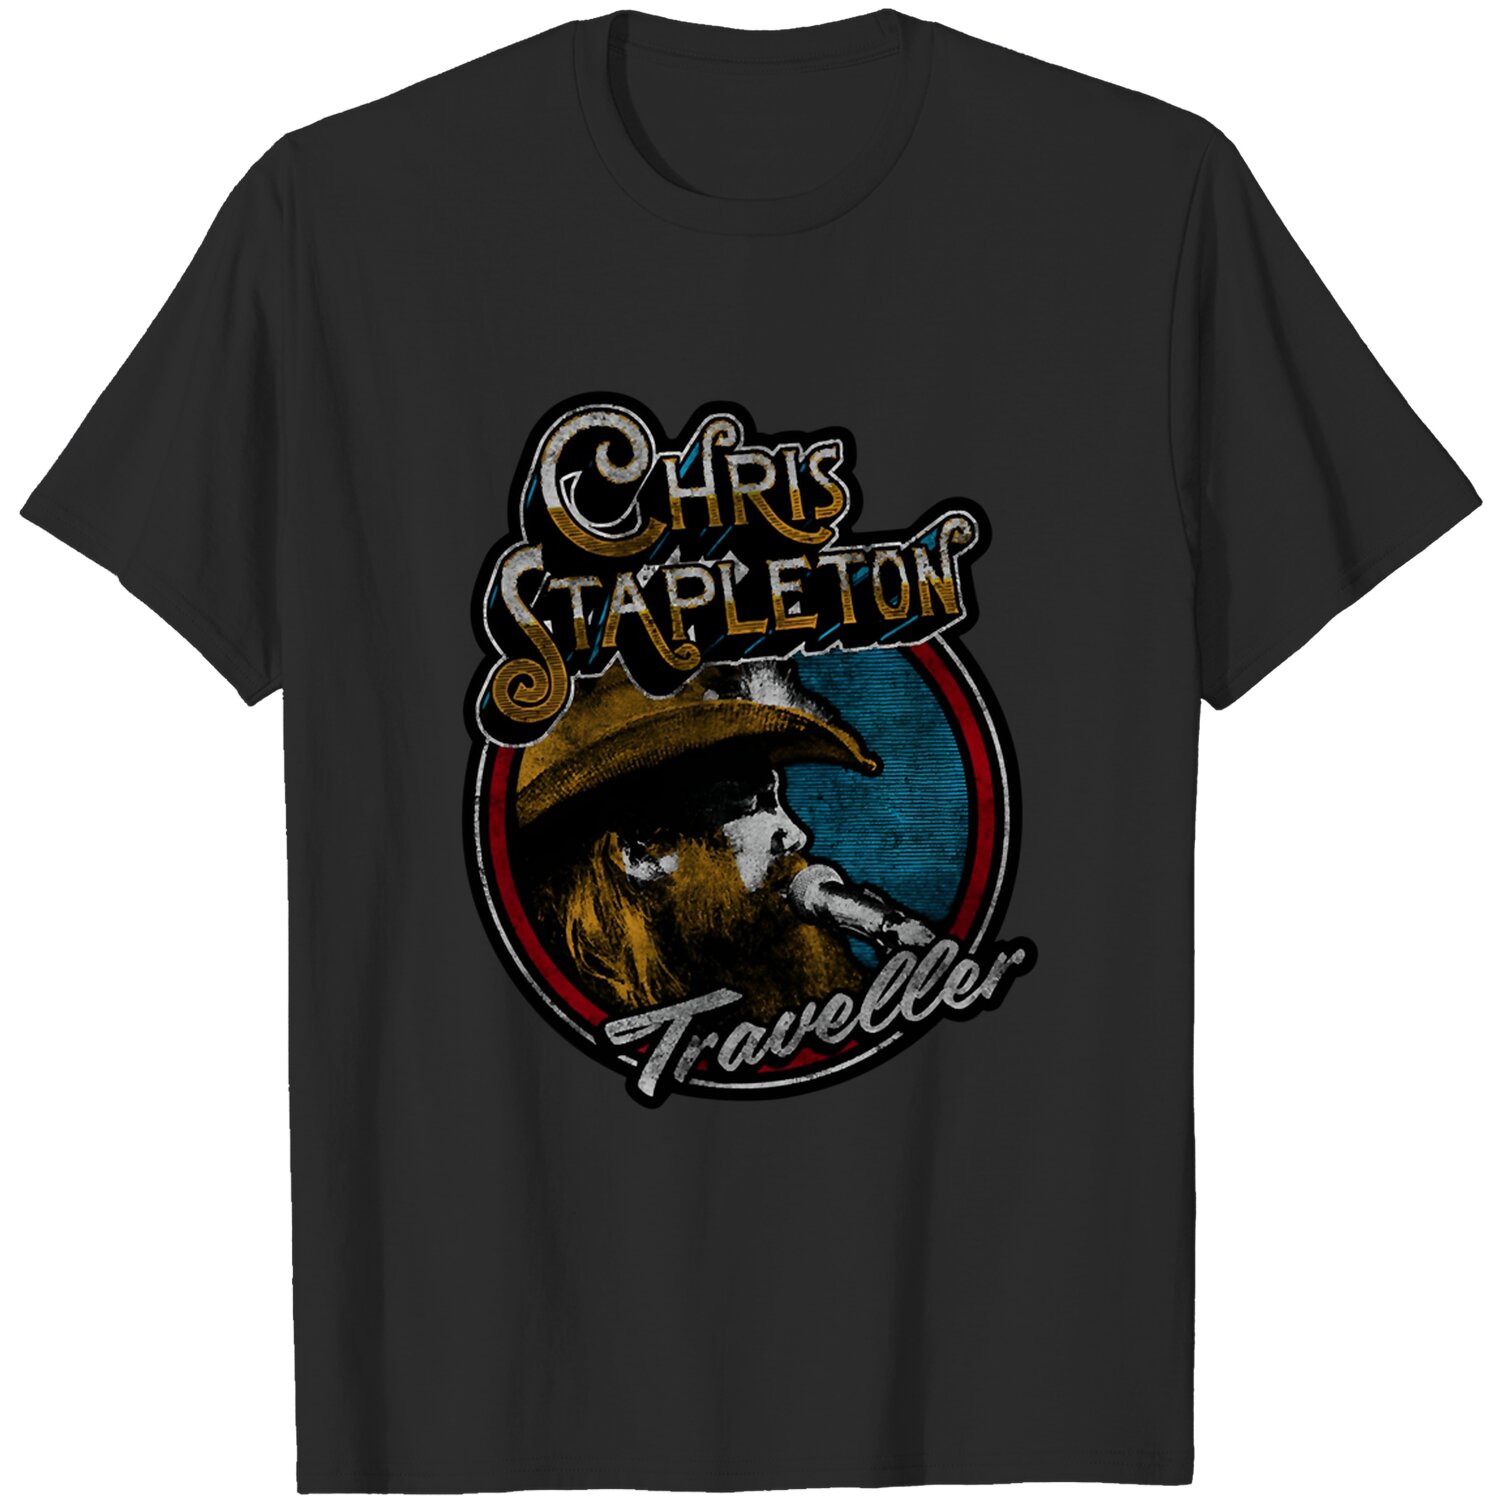 Chris Stapleton Smooth As Tennessee Whiskey Funny Graphic Tee DZT